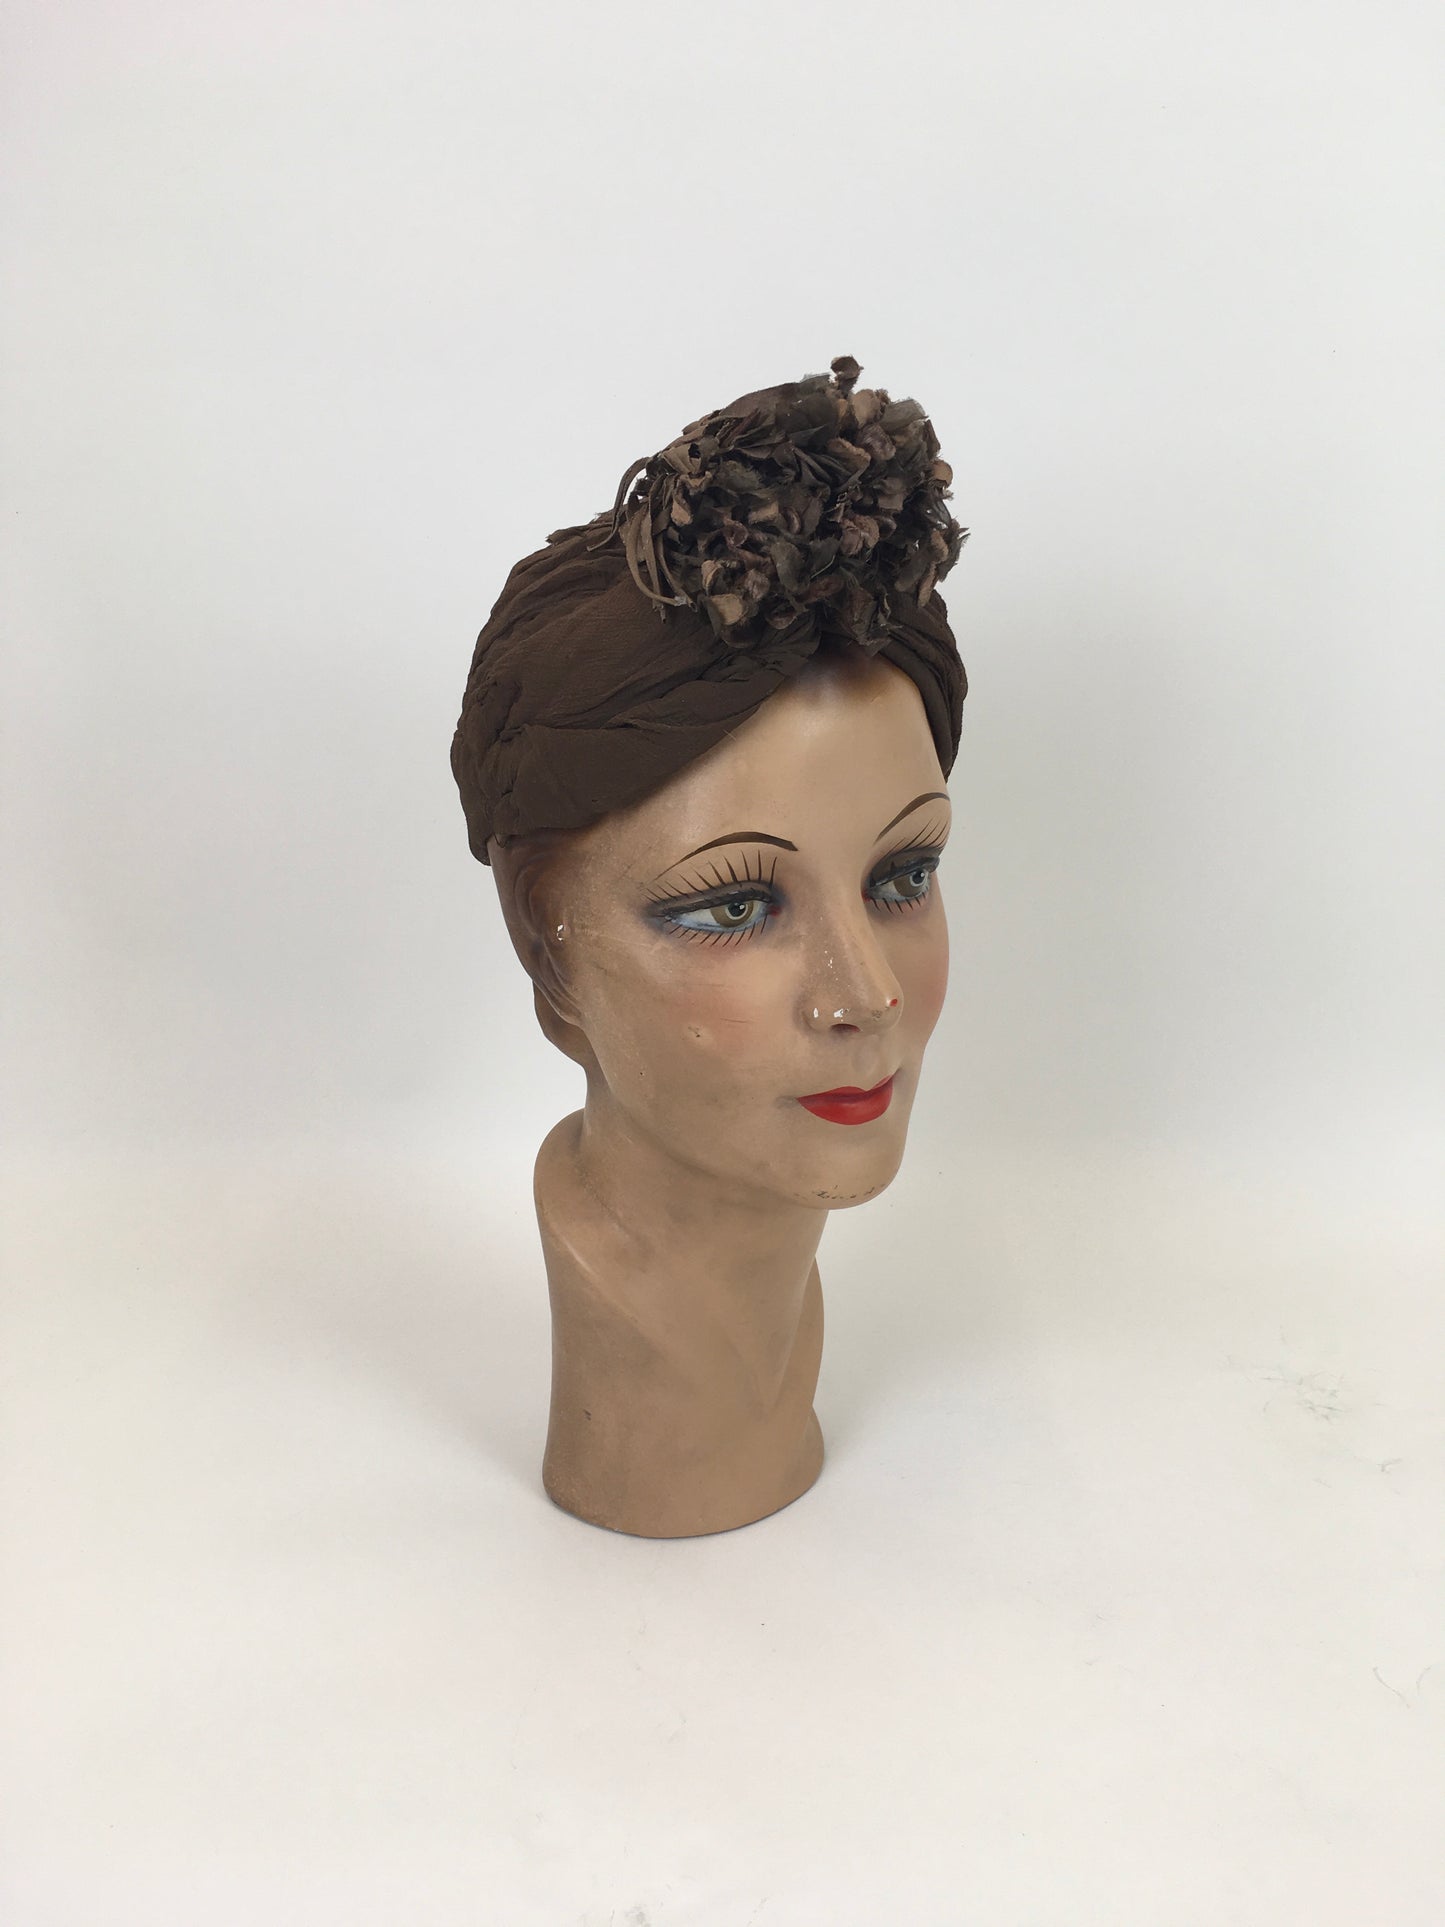 Original 1940’s Fabulous Turban Hat by ‘ Harrods’ - In Chocolate Brown Chiffon with Velvet Millinery